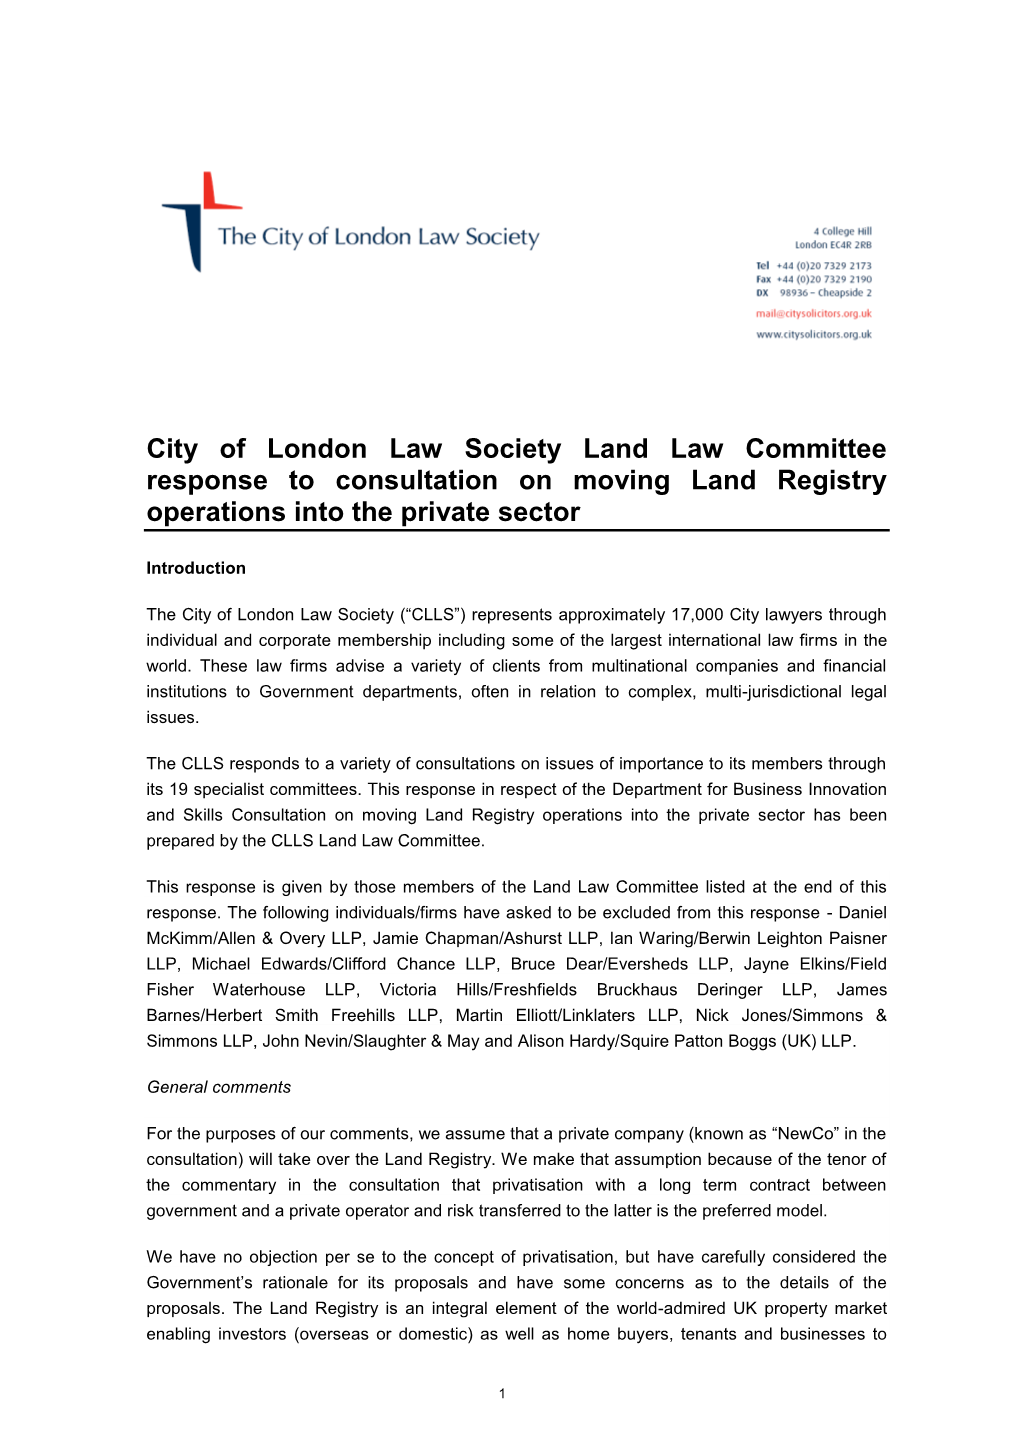 Response to Government Consultation on Moving Land Registry